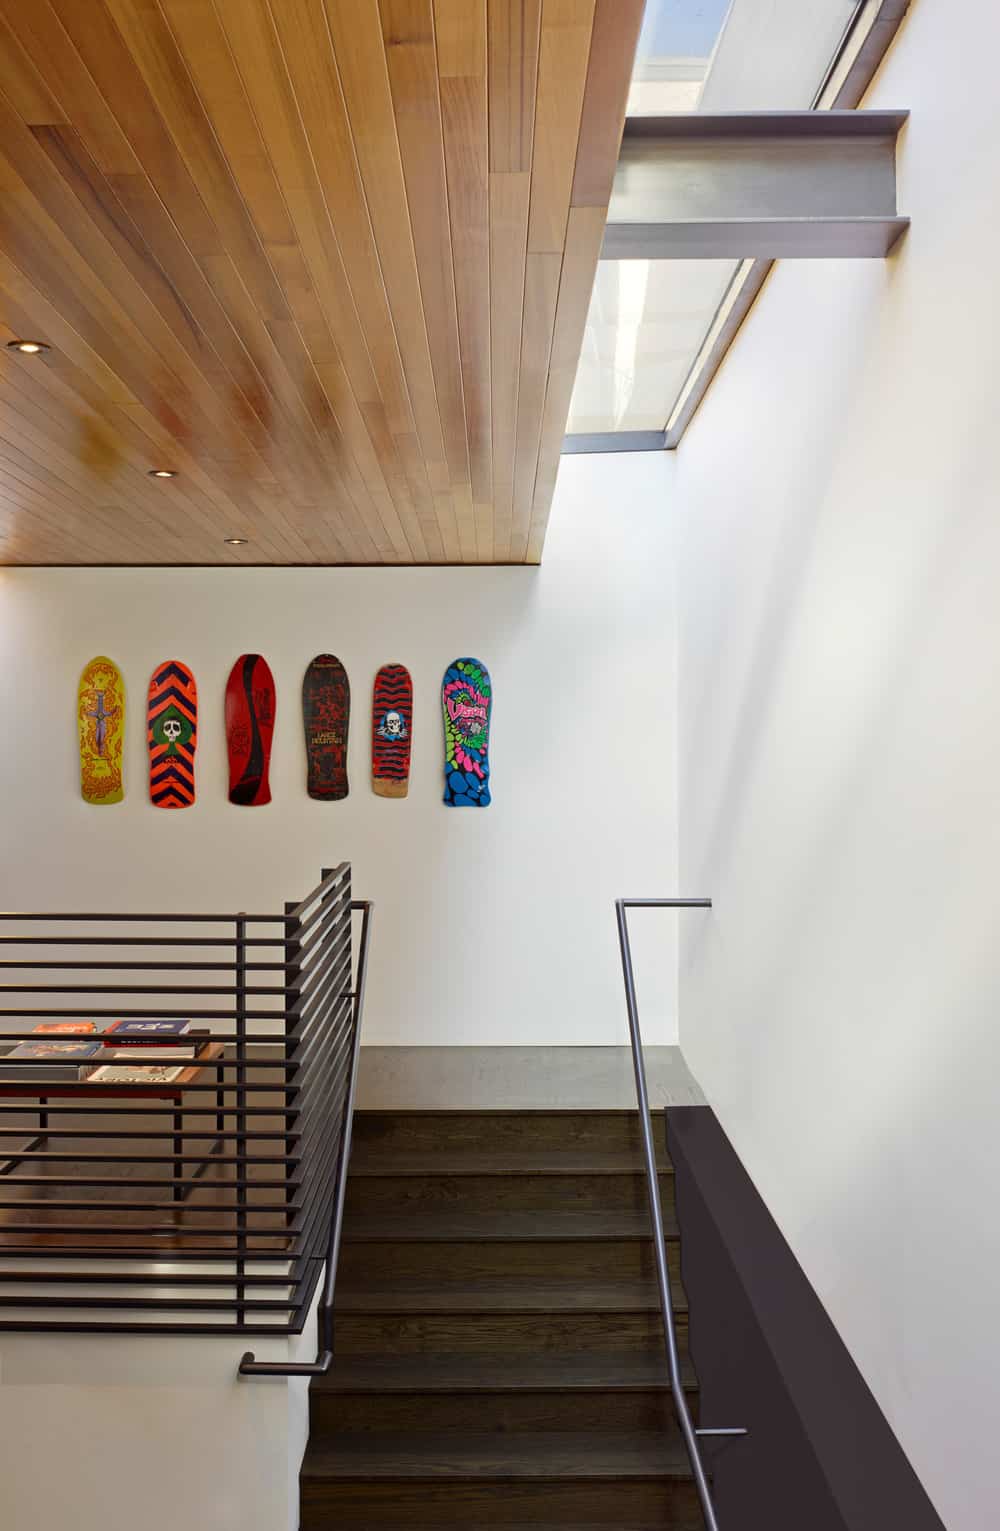 A great way to repurpose old skateboards is to turn them into colorful wall art